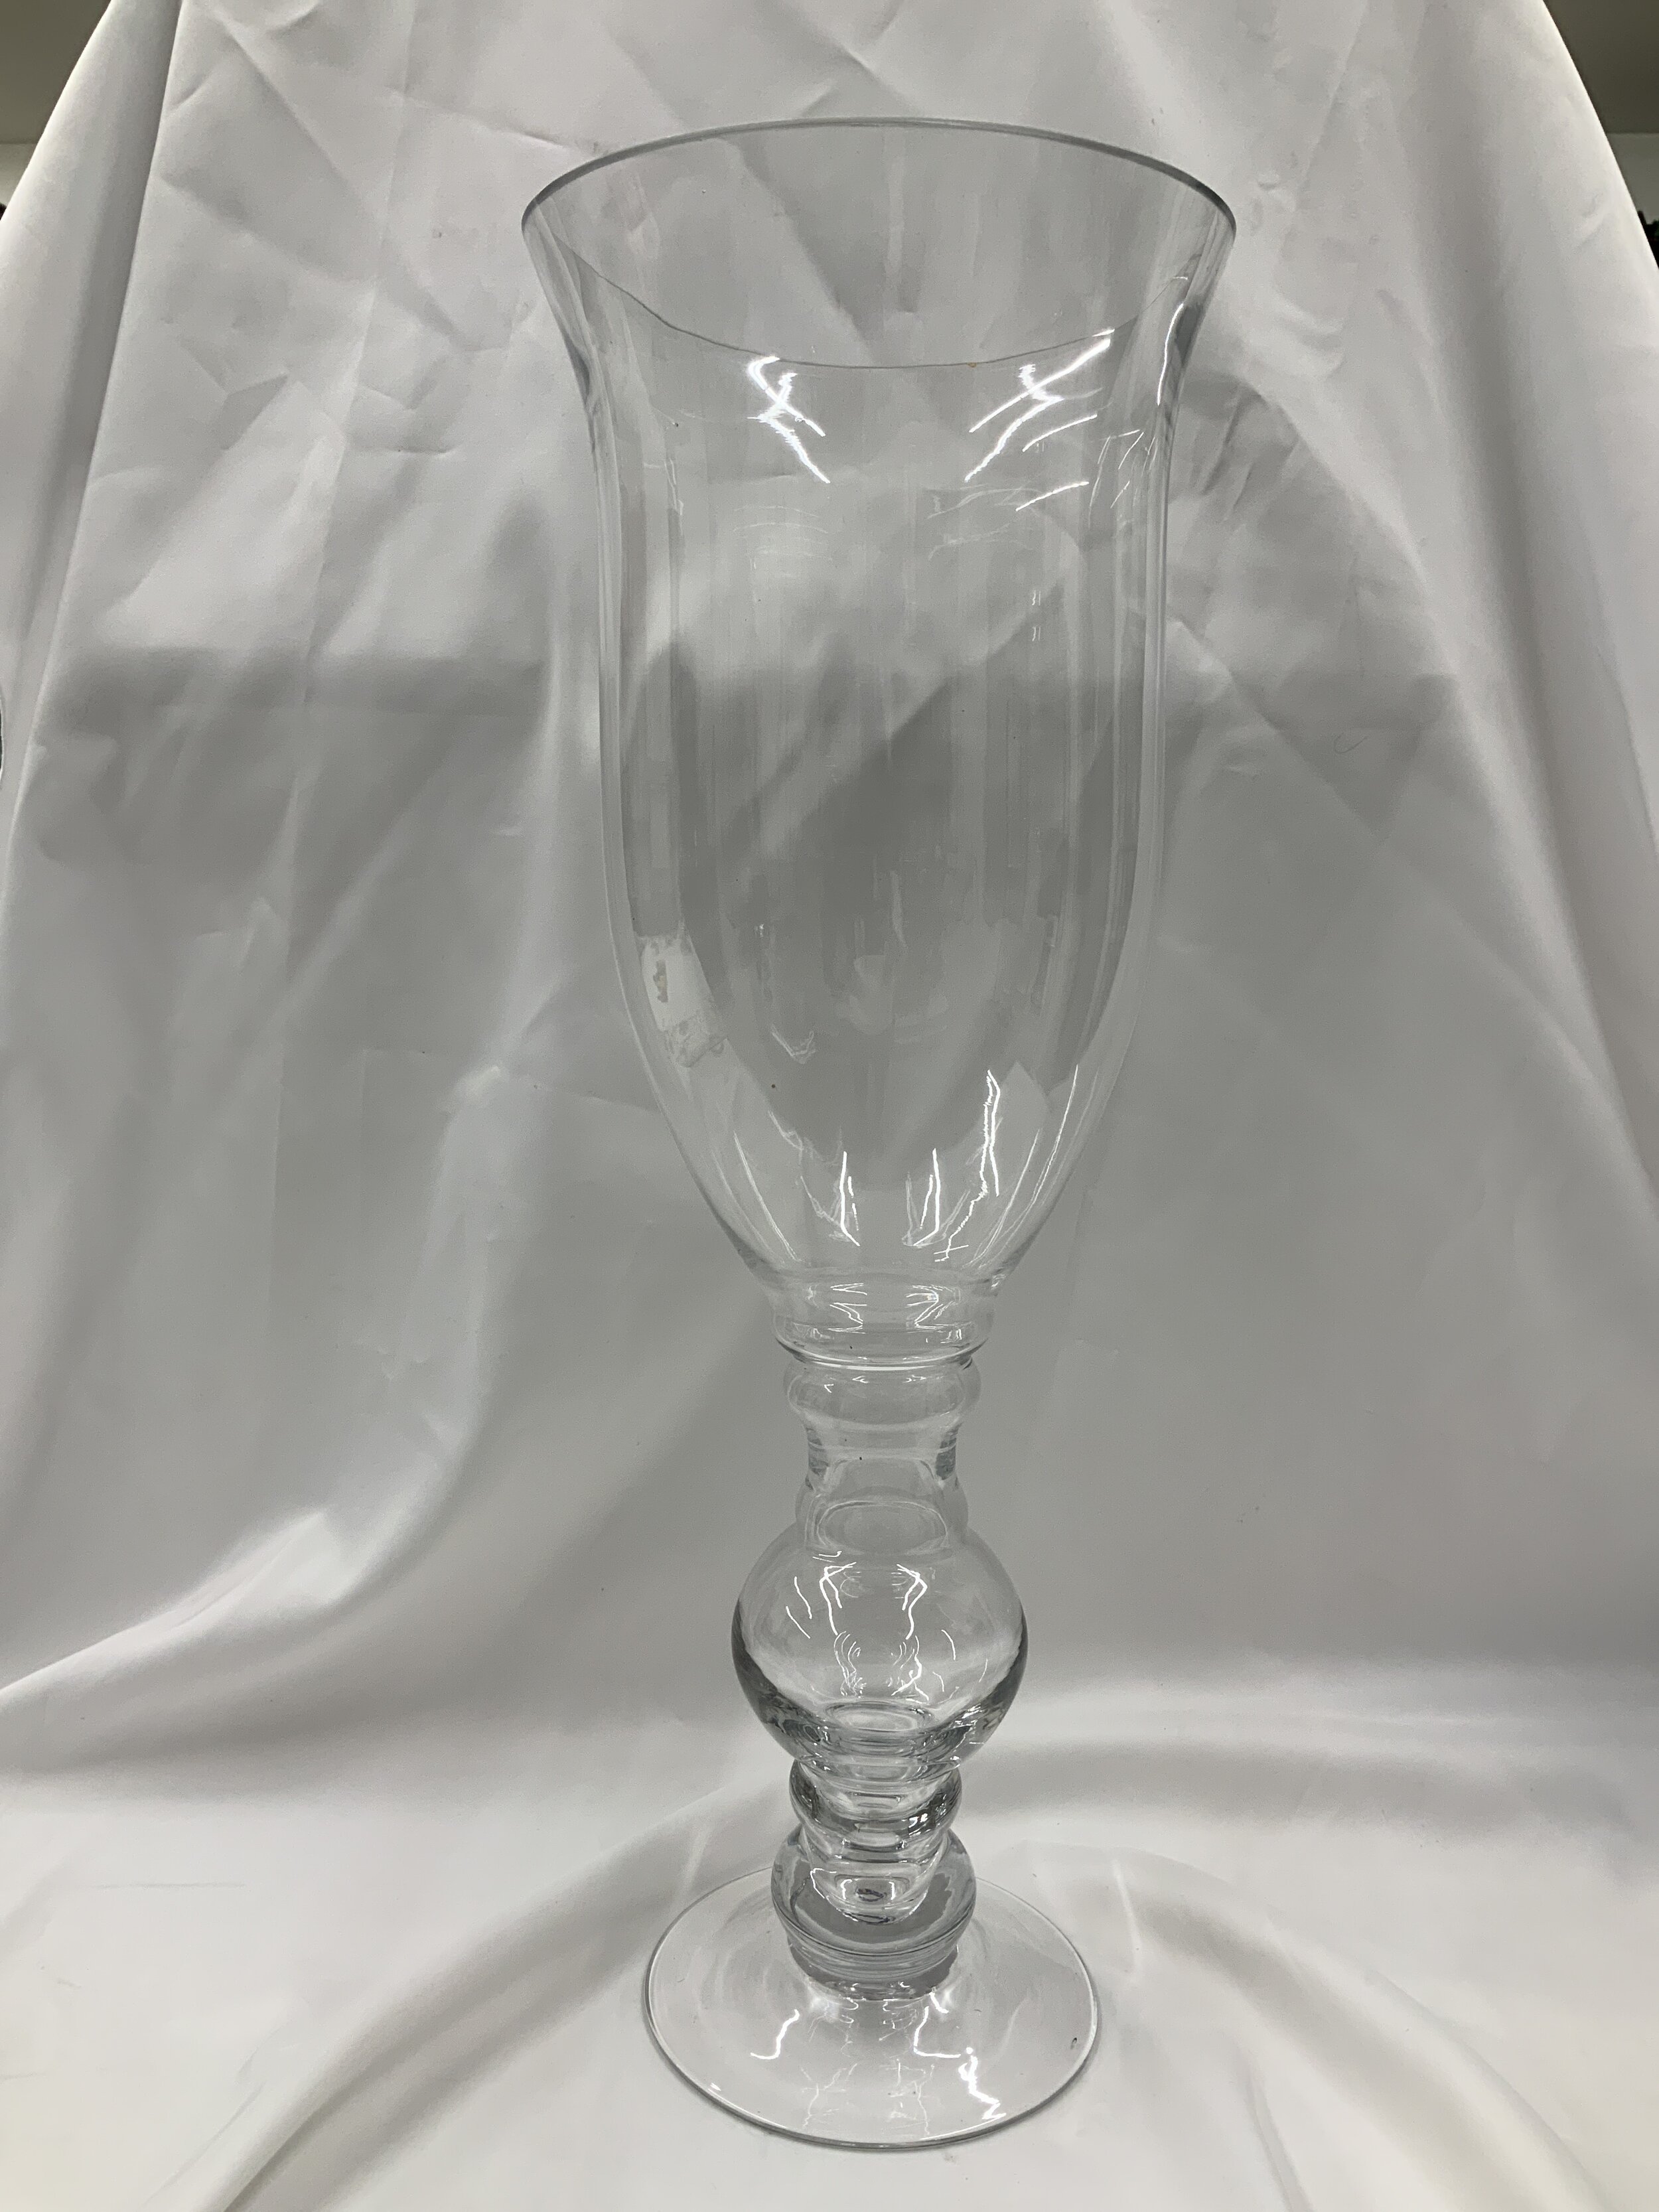 Tall clear glass vase (20) - $10